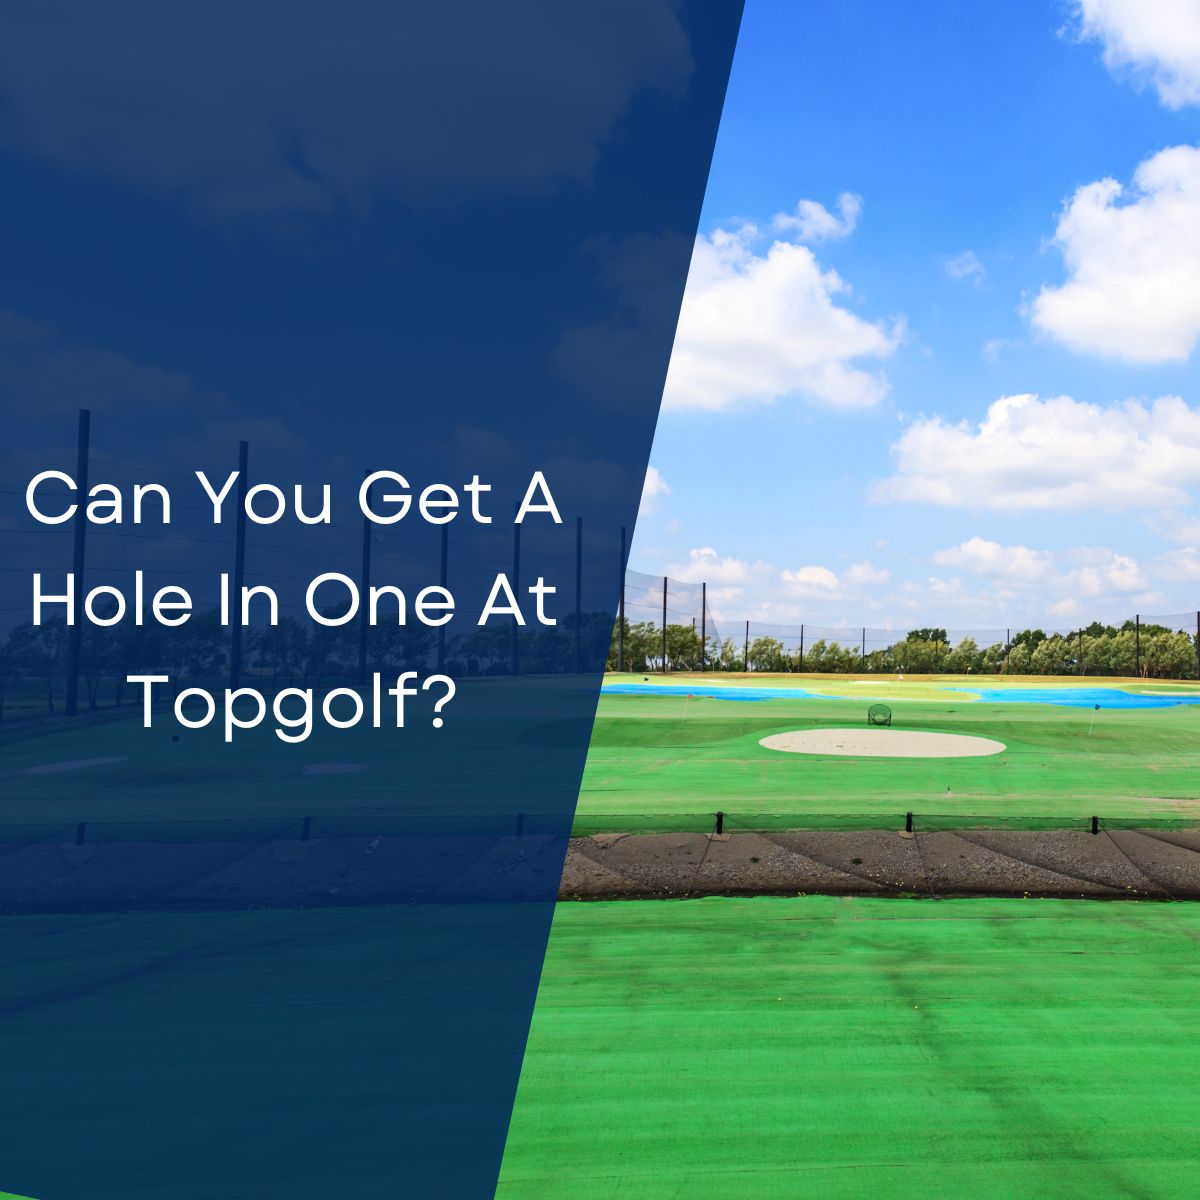 Can You Get A Hole In One At Topgolf?